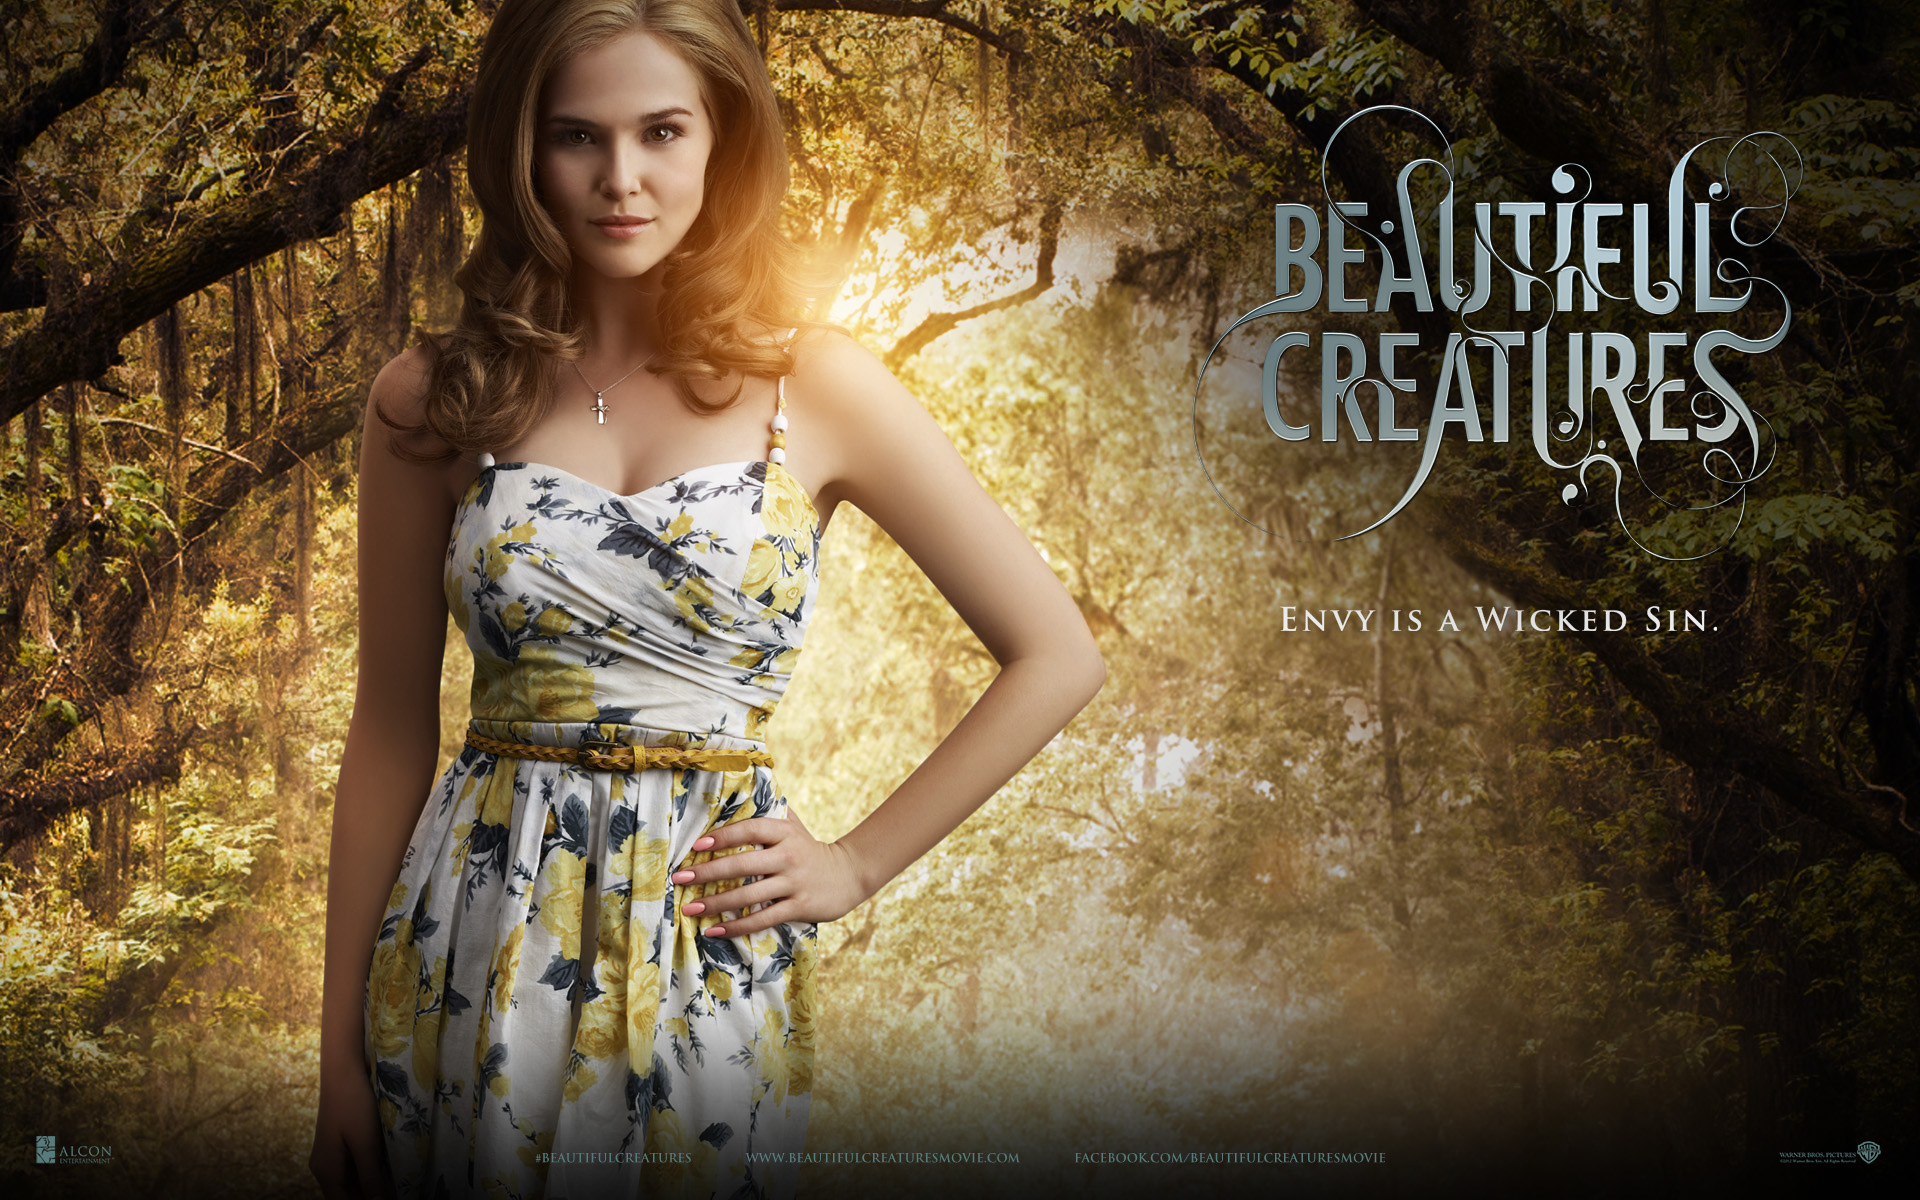 Find more Beautiful Creatures Wallpapers Beautiful Creatures Movie Wallpape...